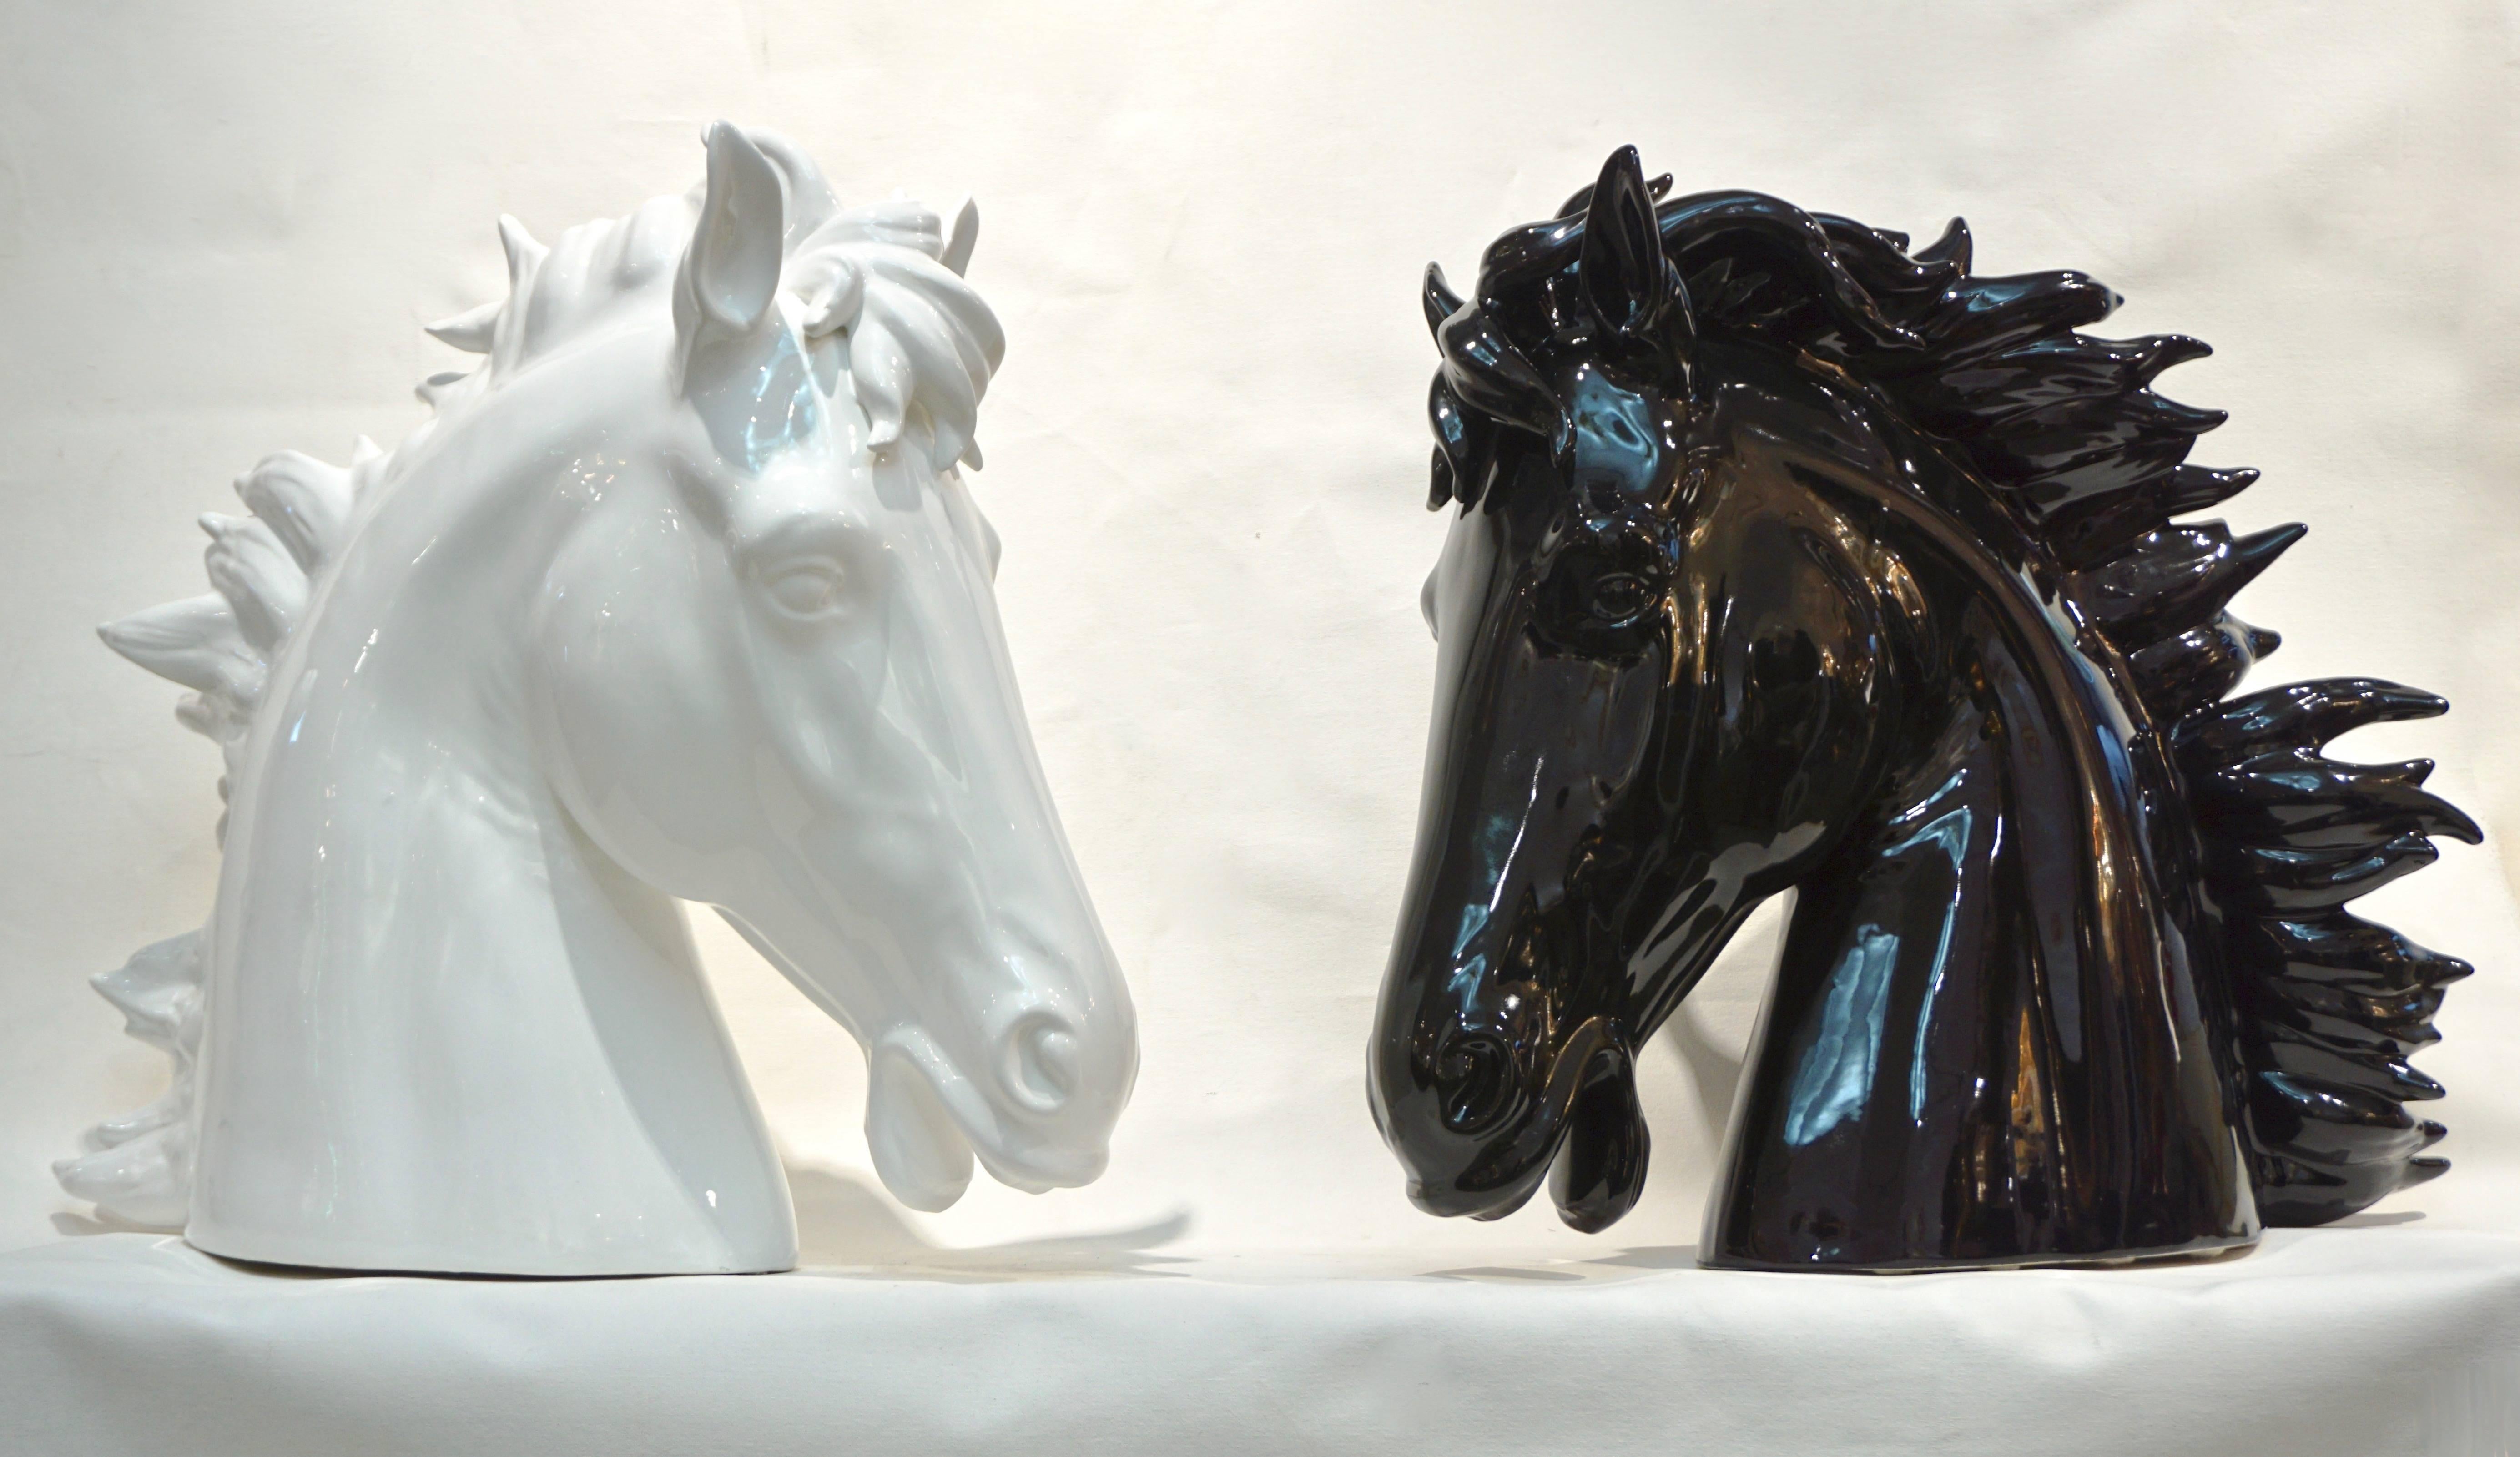 Highly decorative modern pair of grand size ceramic stallion heads, made in Italy. Realistic representation with flowing ruffled mane, the black and white colors highlighted by the quality glaze finish.

 